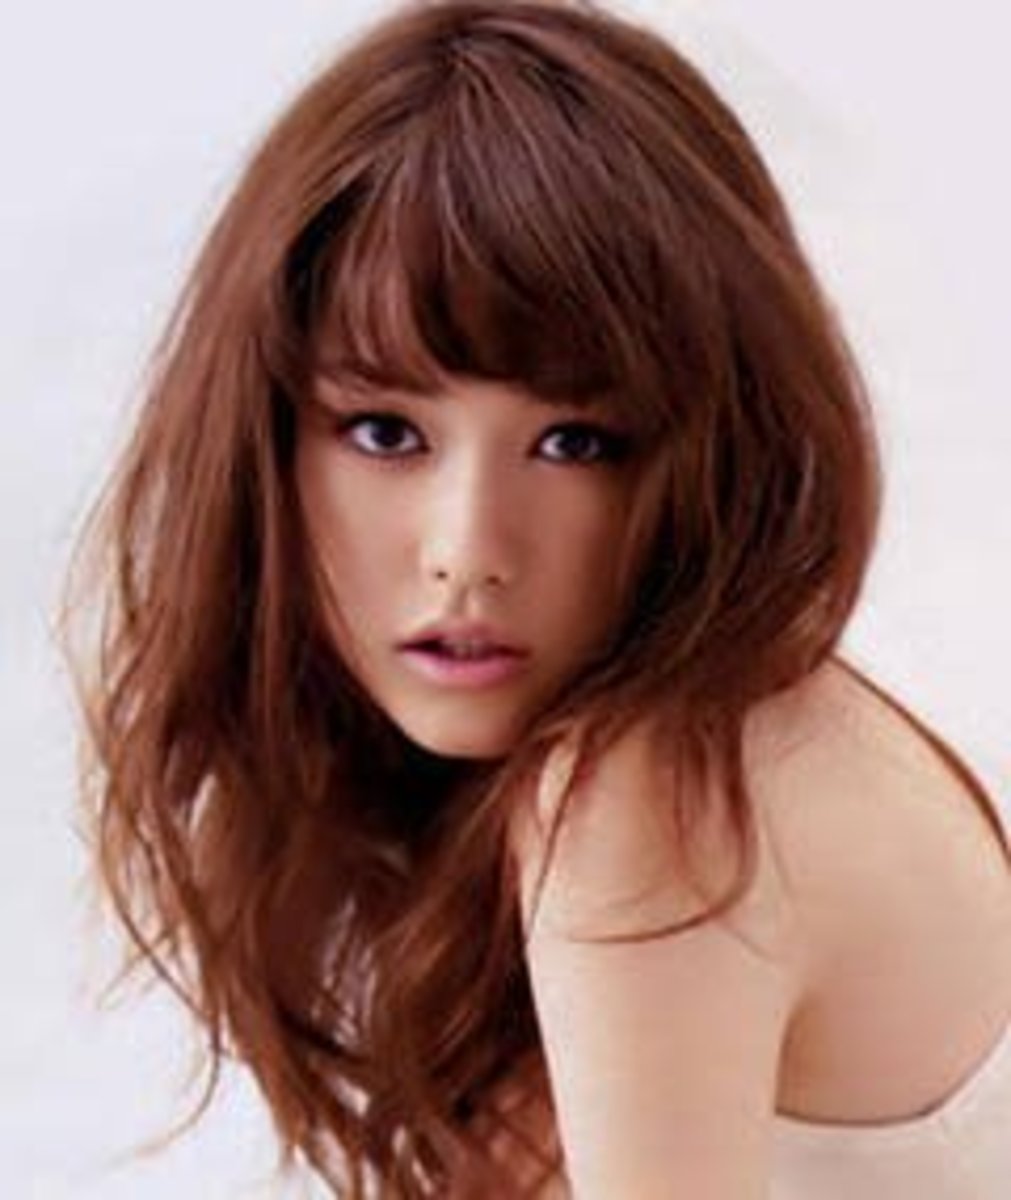 The Most Beautiful And Popular Japanese Actresses Beautiful Vrogue